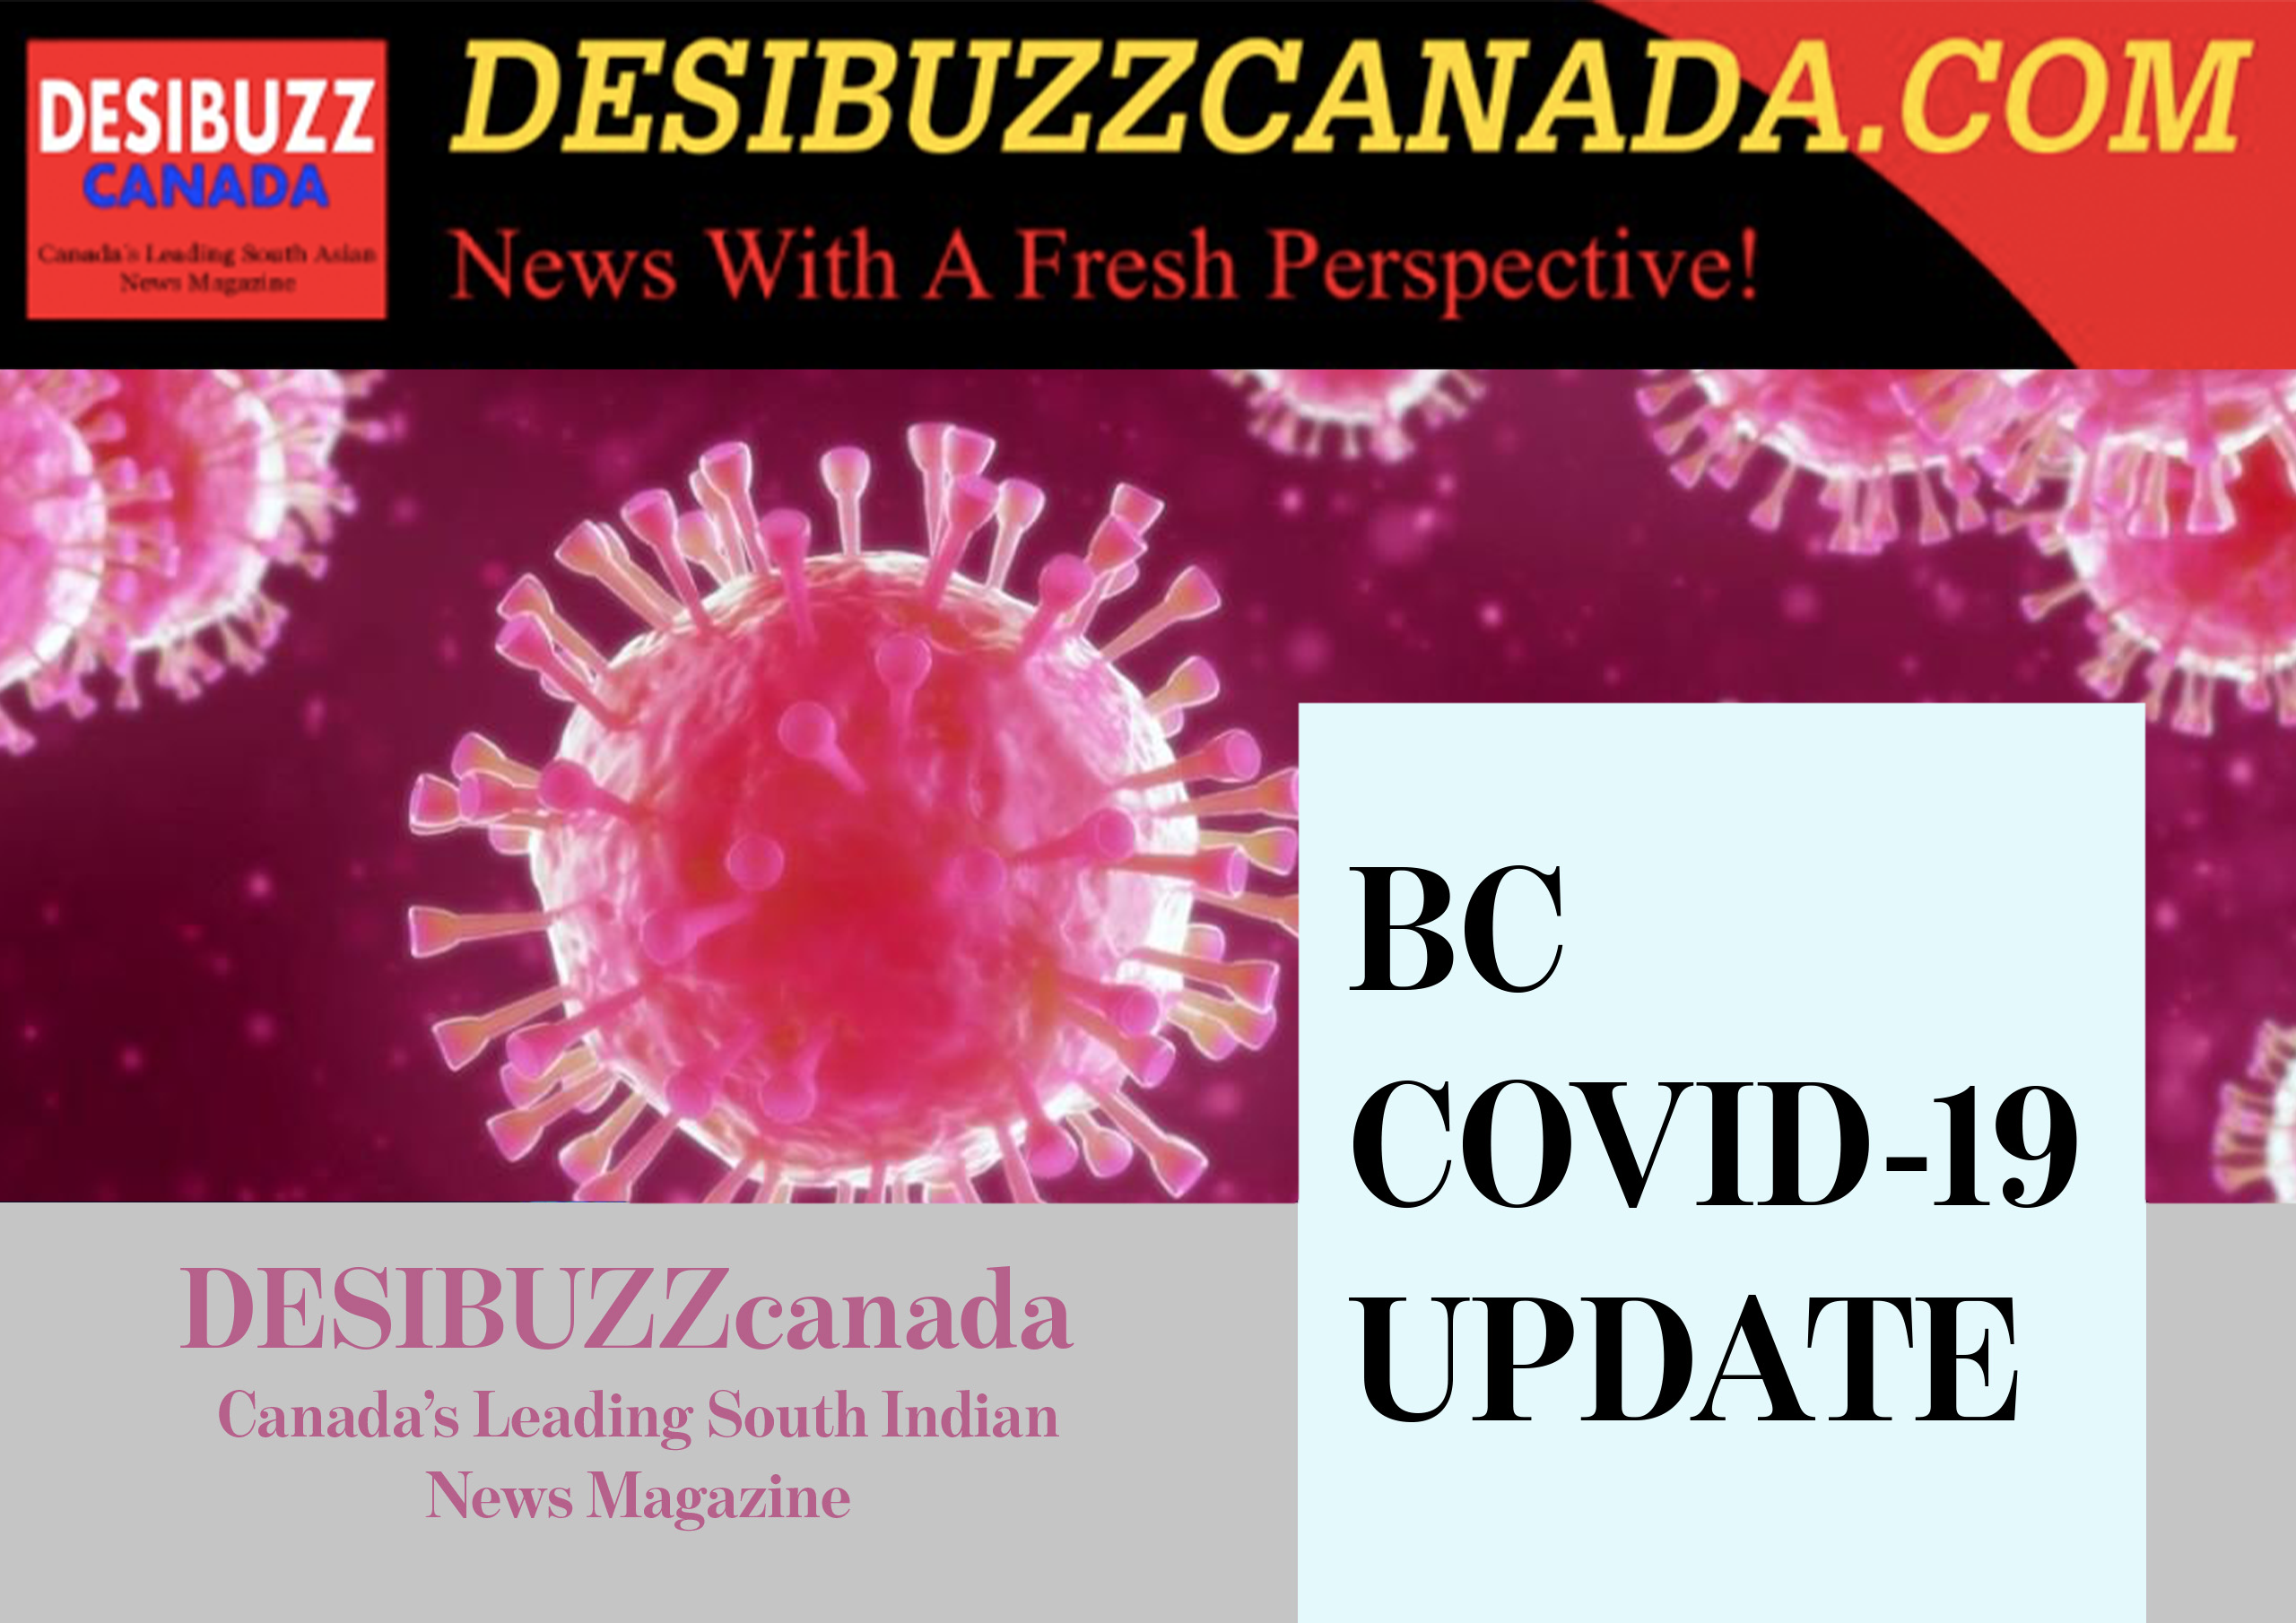 BC COVID-19 UPDATE: Over 200 Cases And Two Deaths Reported Thursday